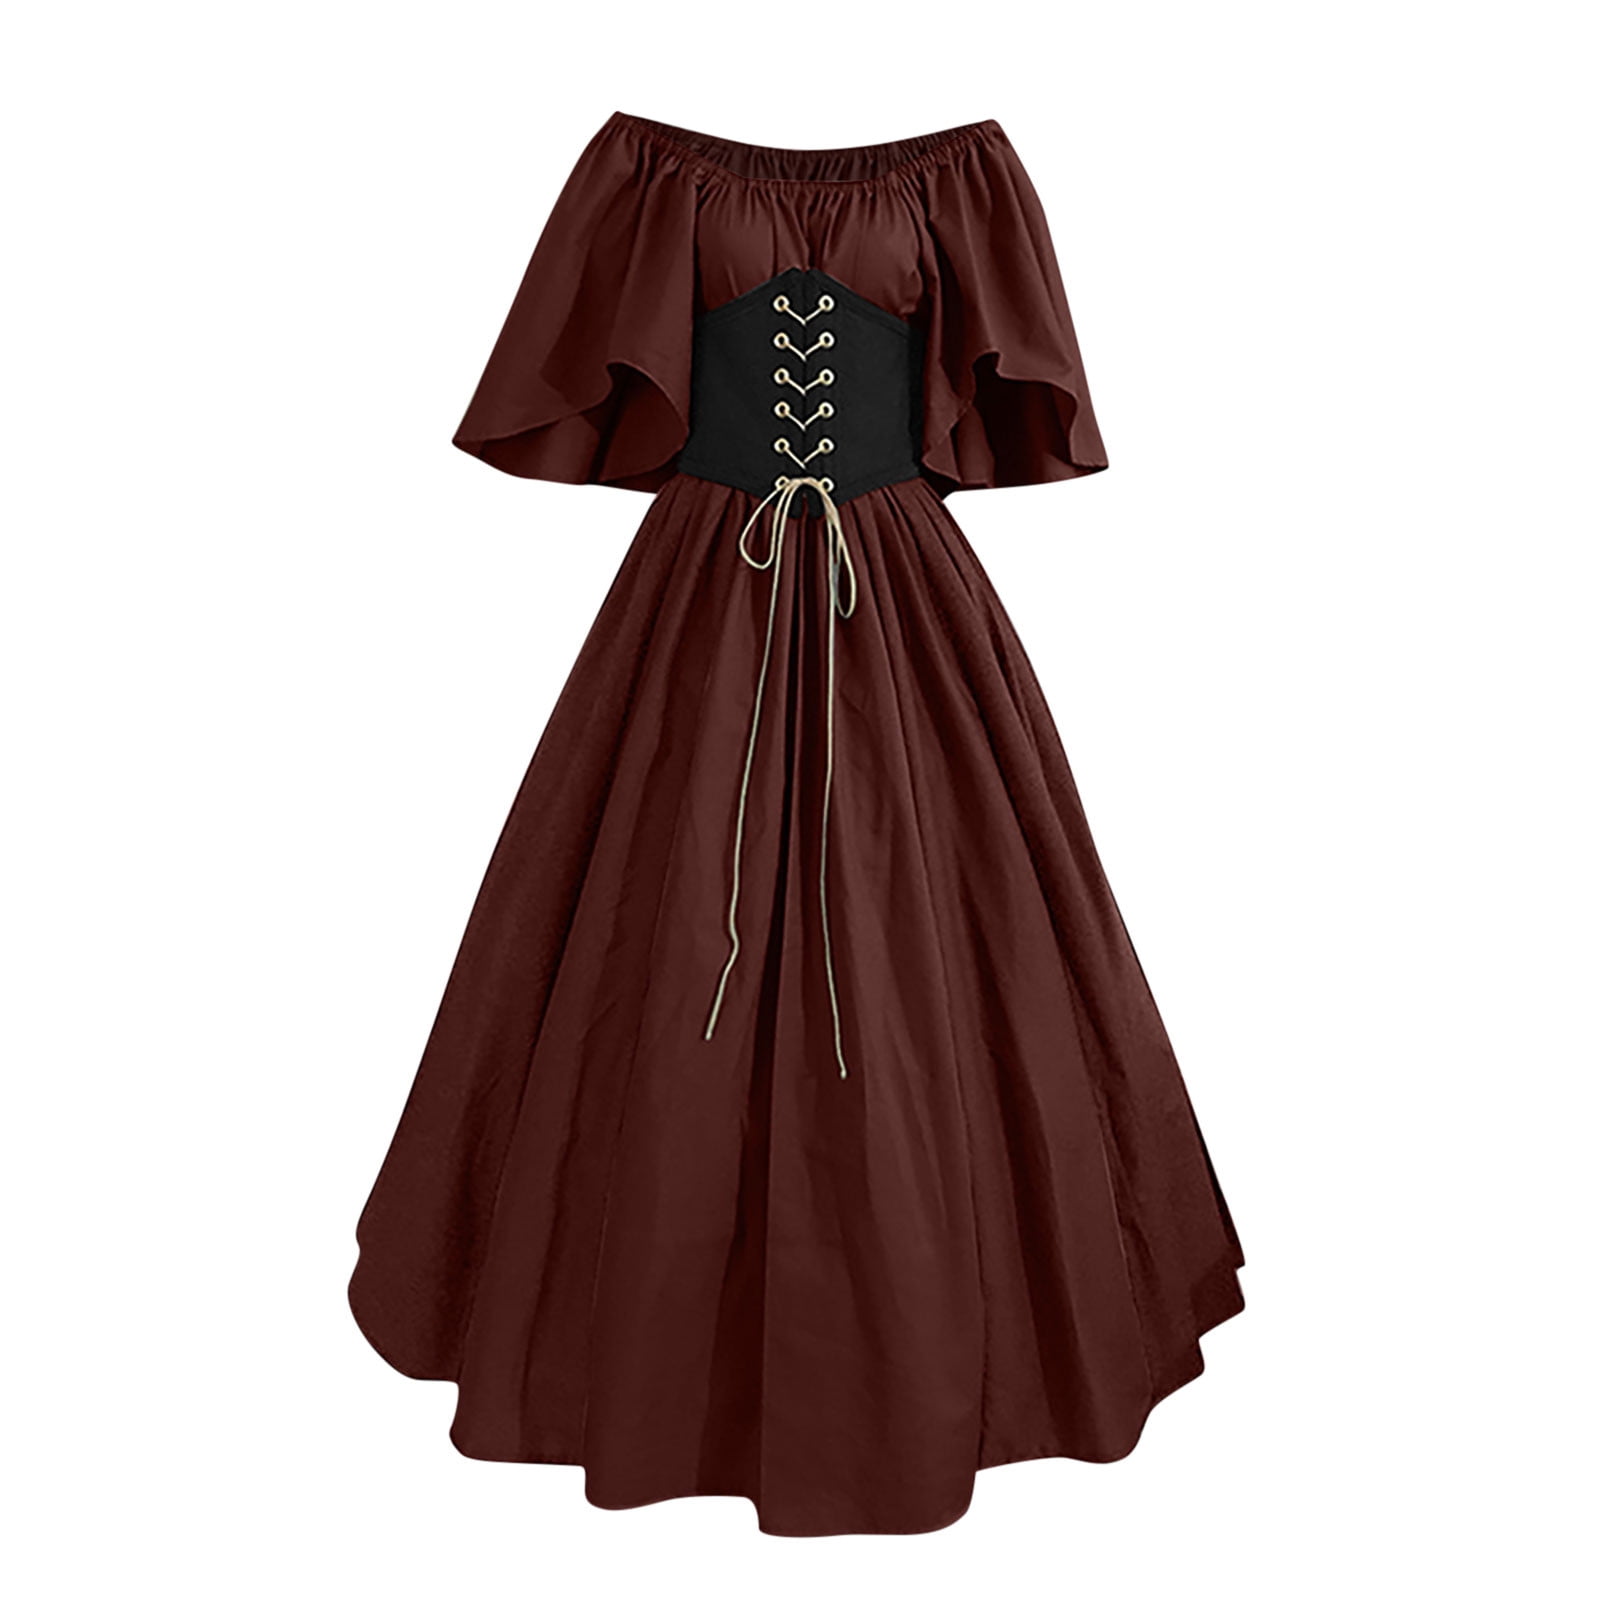 YWDJ 80s Prom Dress Women Round Neck Flare Sleeve Off Shoulder Medieval Vintage Dresses With Corset Patchwork Ball Gown Spring Summer 2023WineM ace8f1f6 7ee3 4b75 94ba 978406c31d65.a3b4d6c52173d361001d1d7c1580ffb4